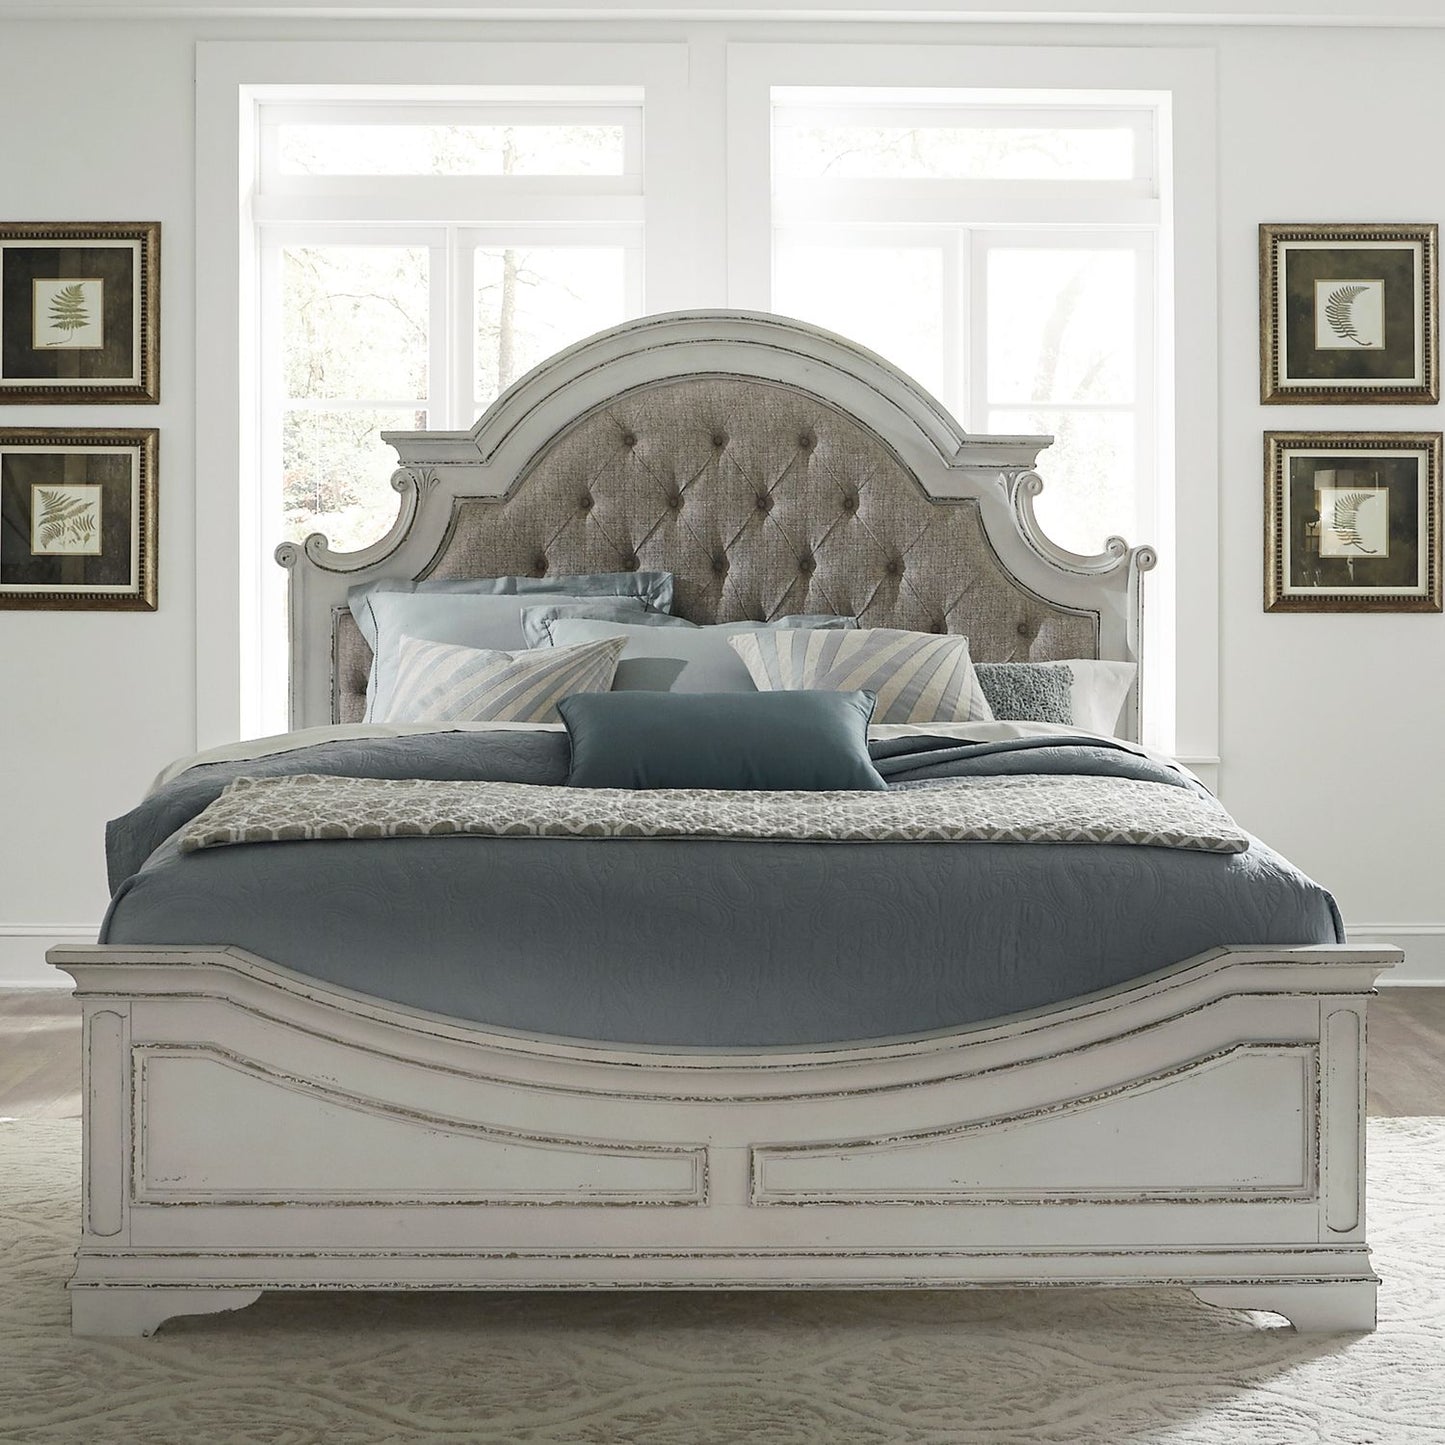 Magnolia Manor - King Uph Bed, Dresser & Mirror, Chest, Night Stand